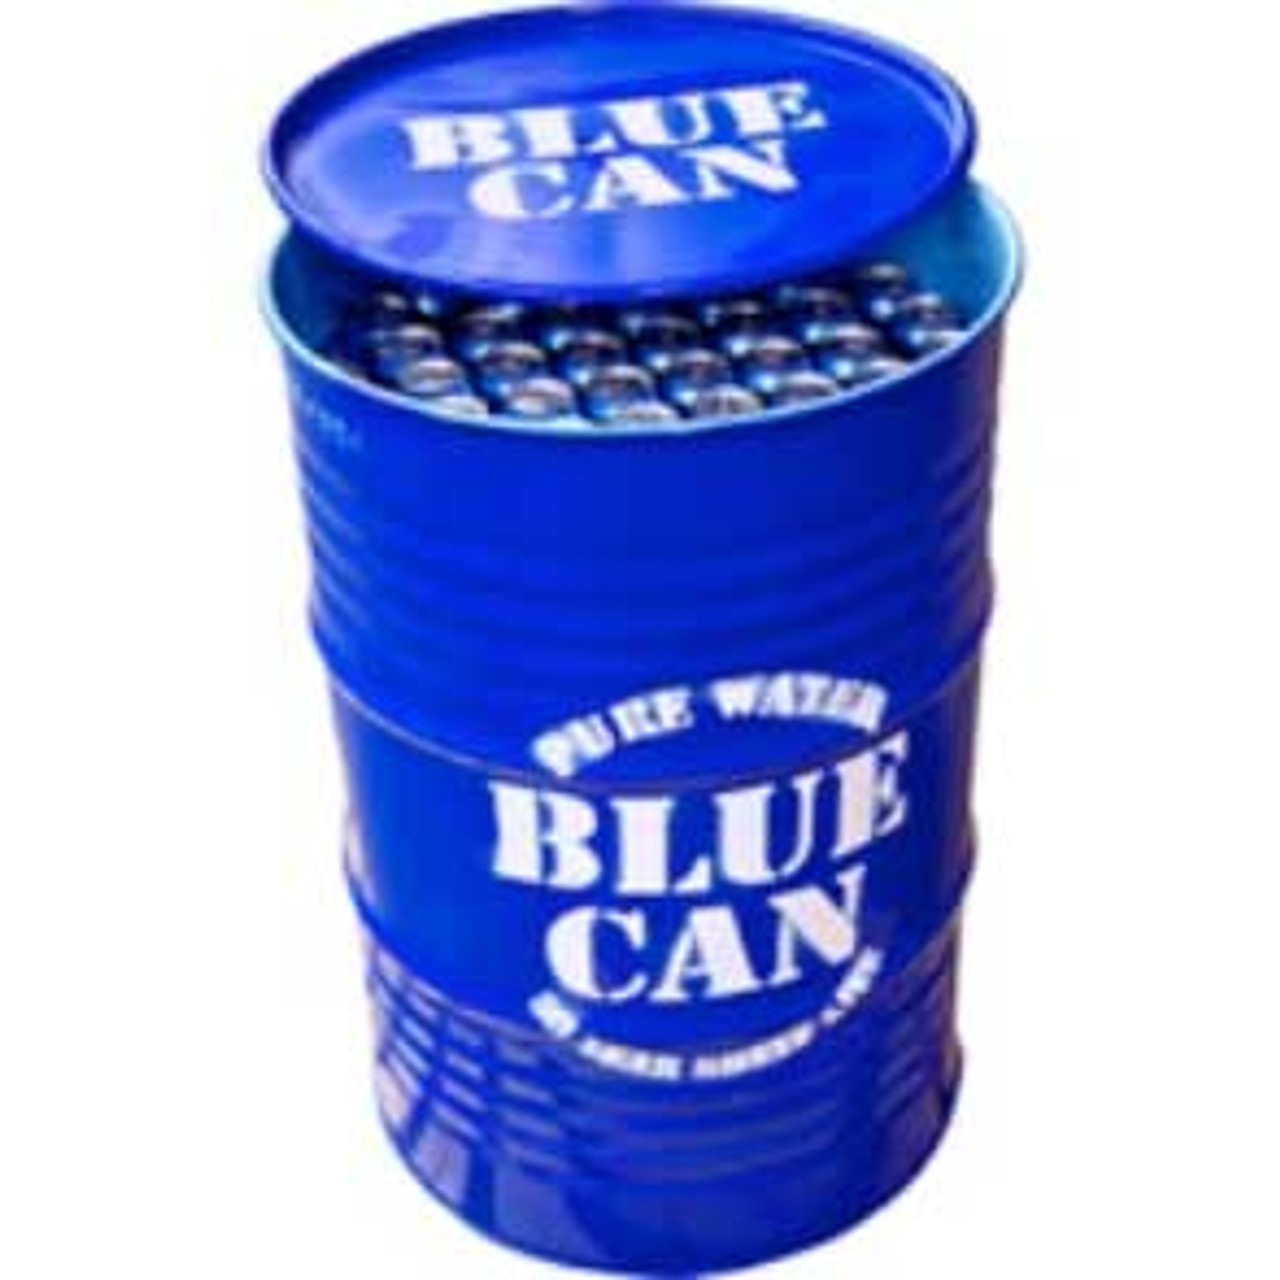 48-Pack of Blue Can Emergency Drinking Water